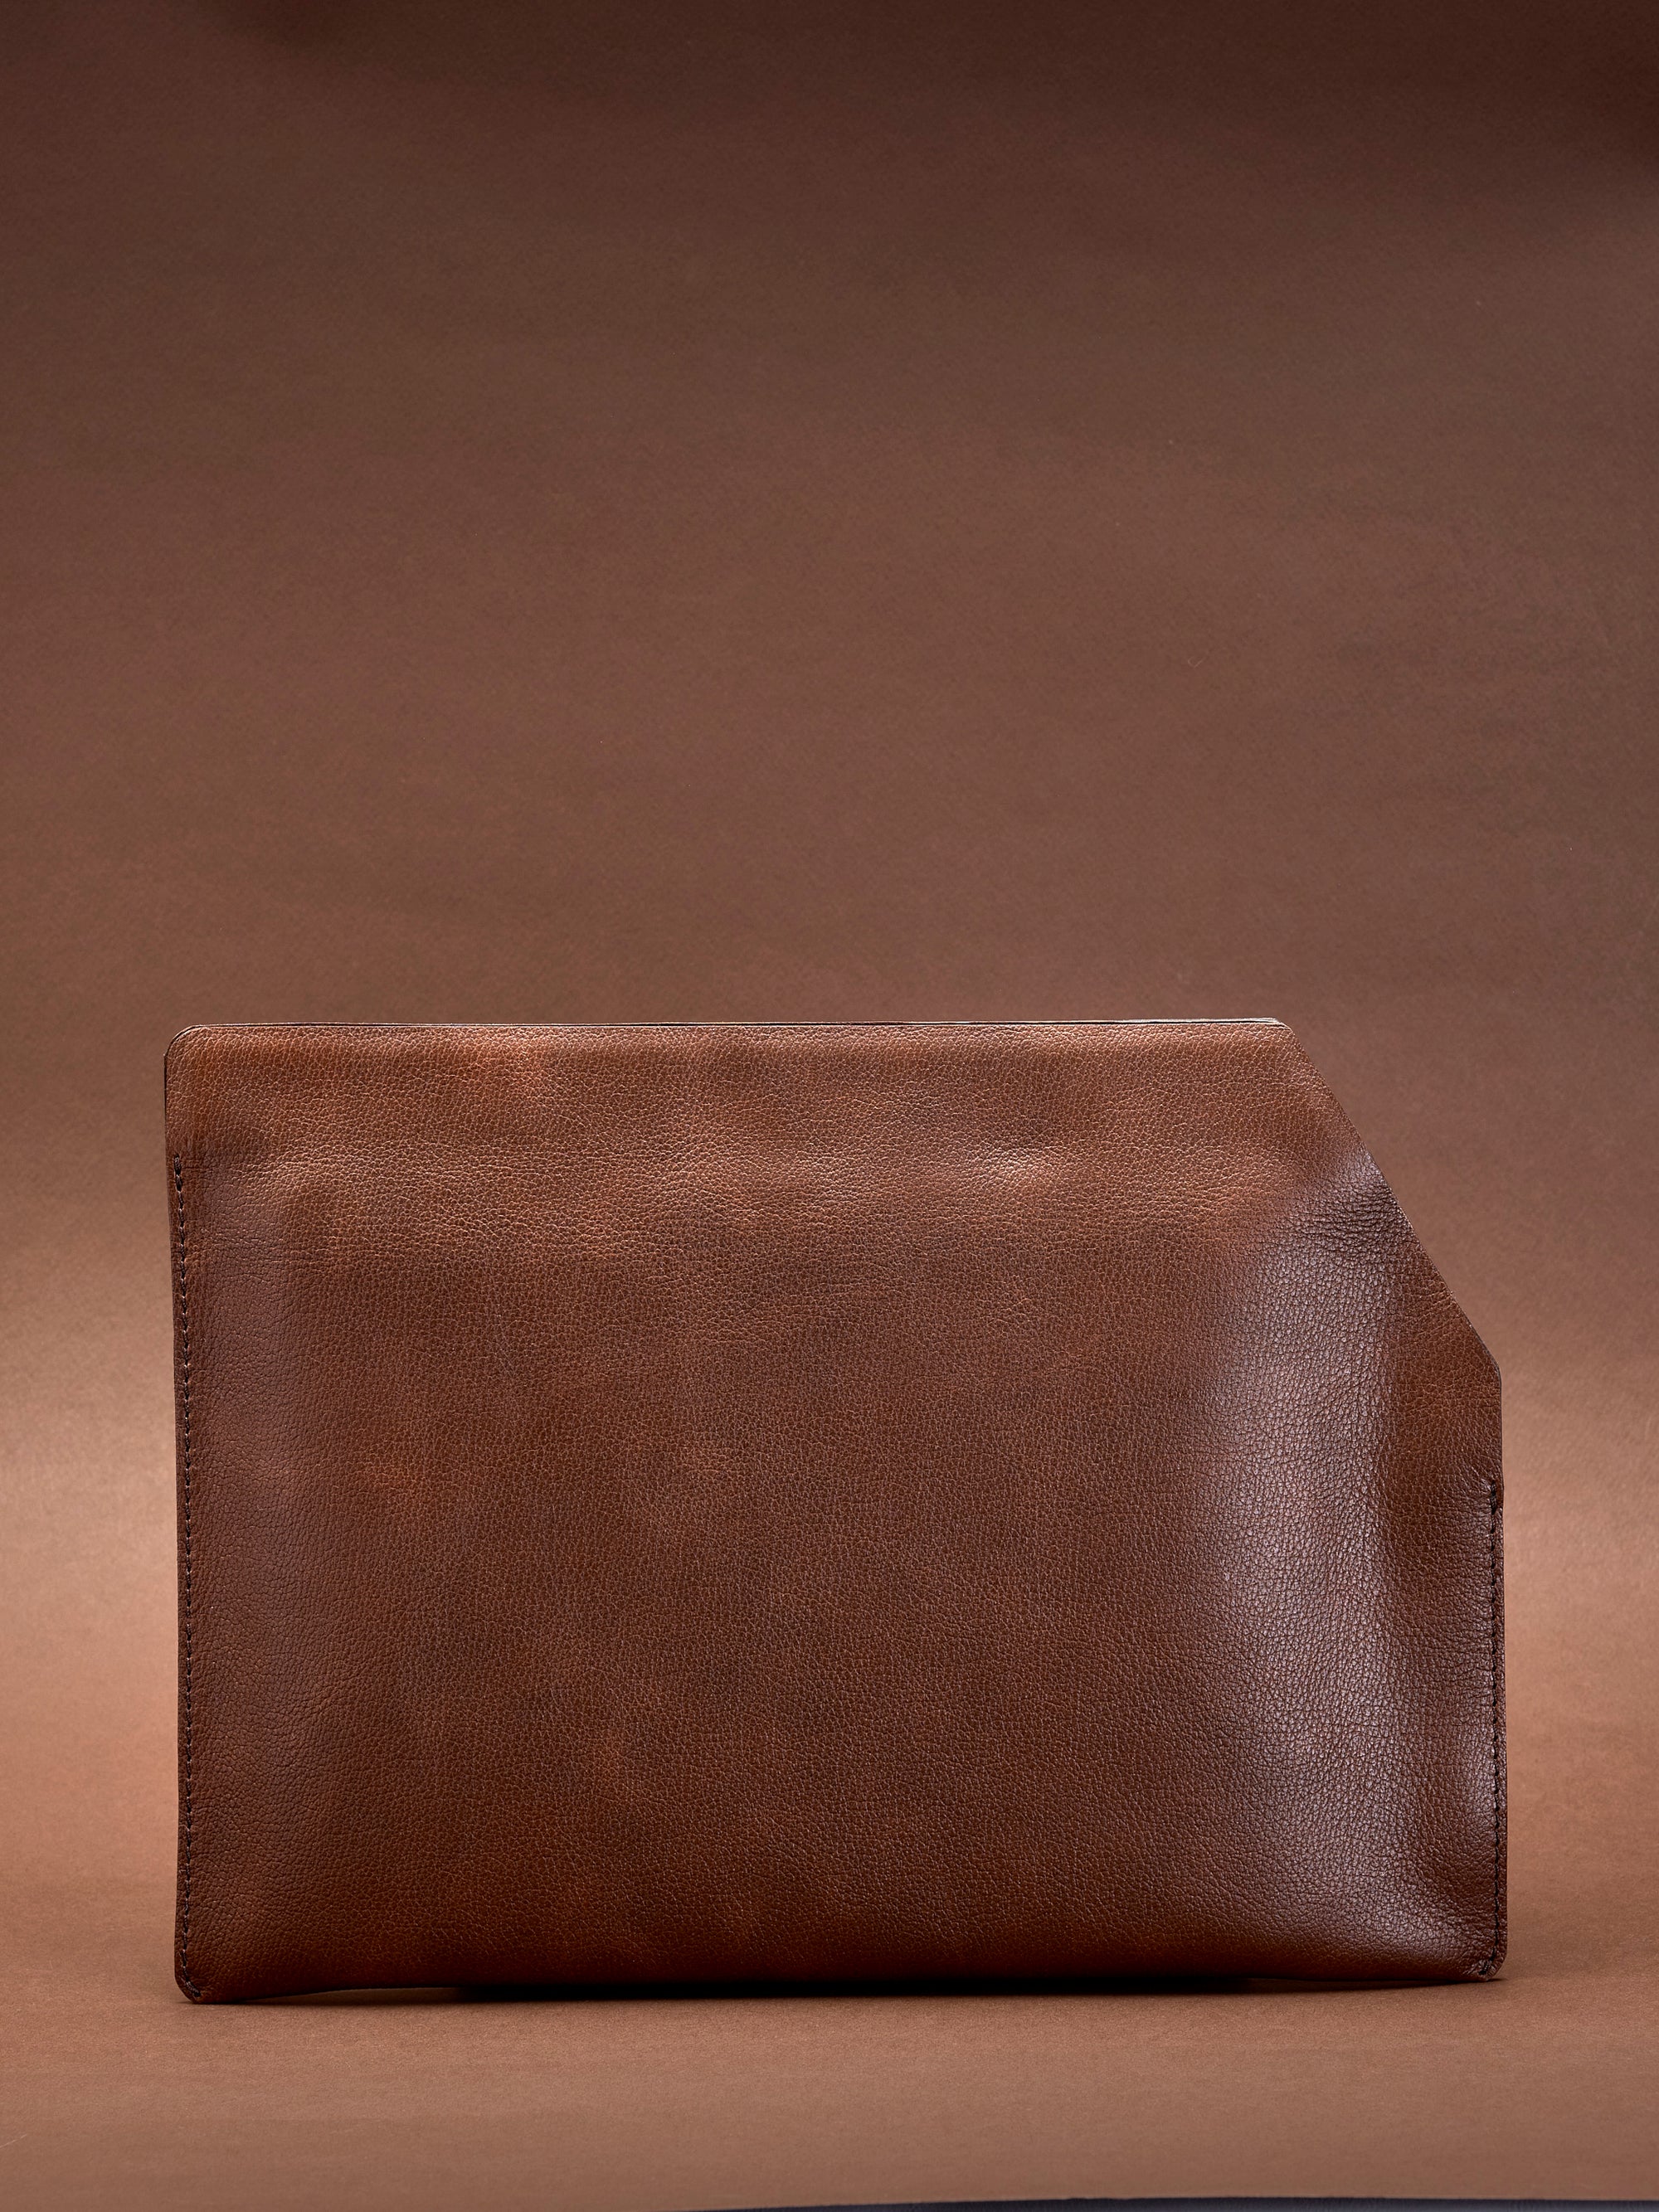 Full grain leather. Draftsman 7 iPad Sleeve Cover Brown, iPad Pro 11-inch, iPad Pro 12.9-inch, M1 Chip by Capra Leather